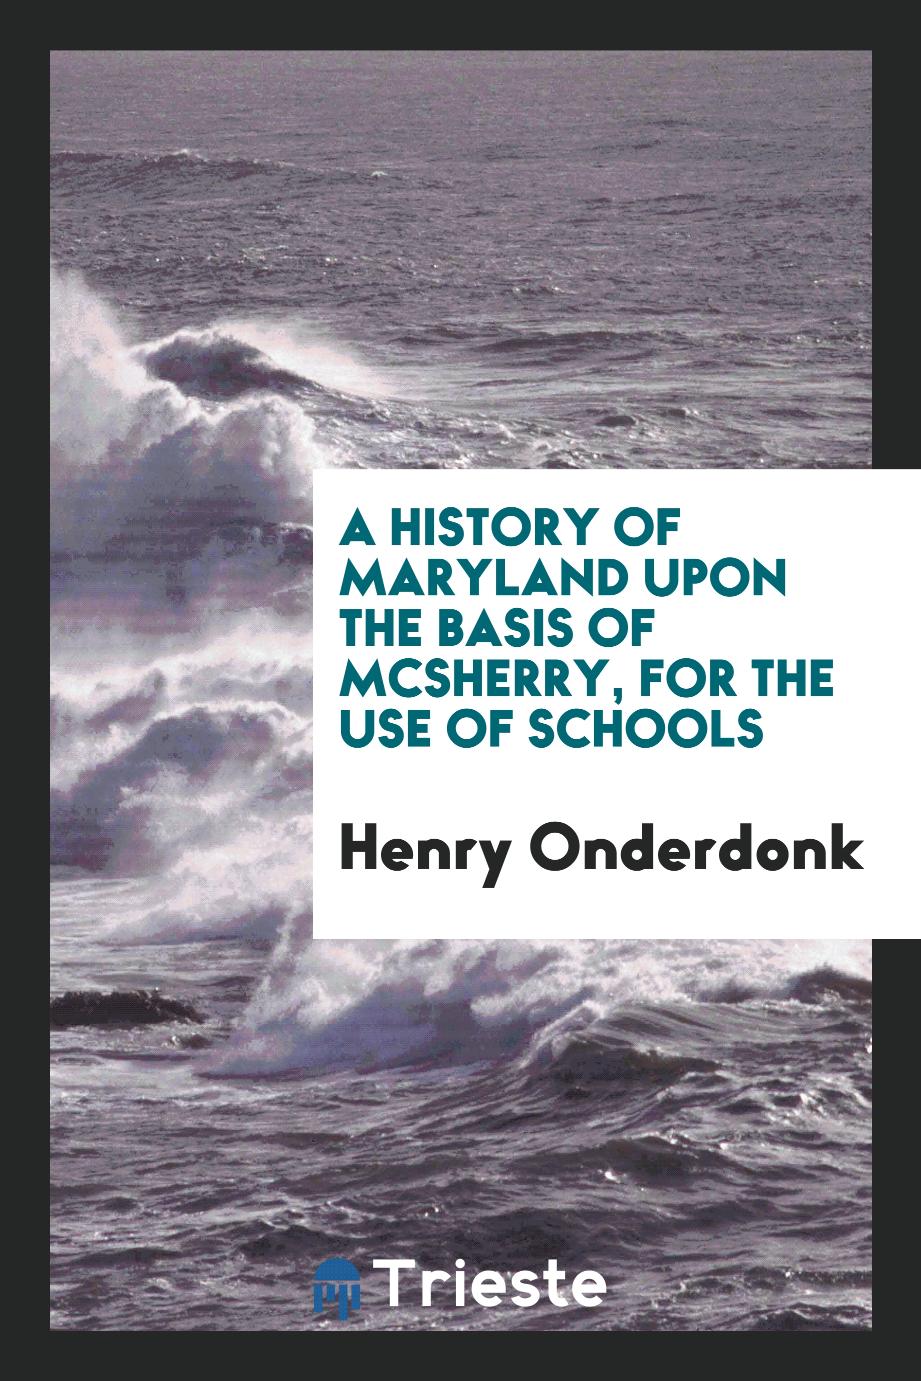 A History of Maryland upon the Basis of McSherry, for the Use of Schools